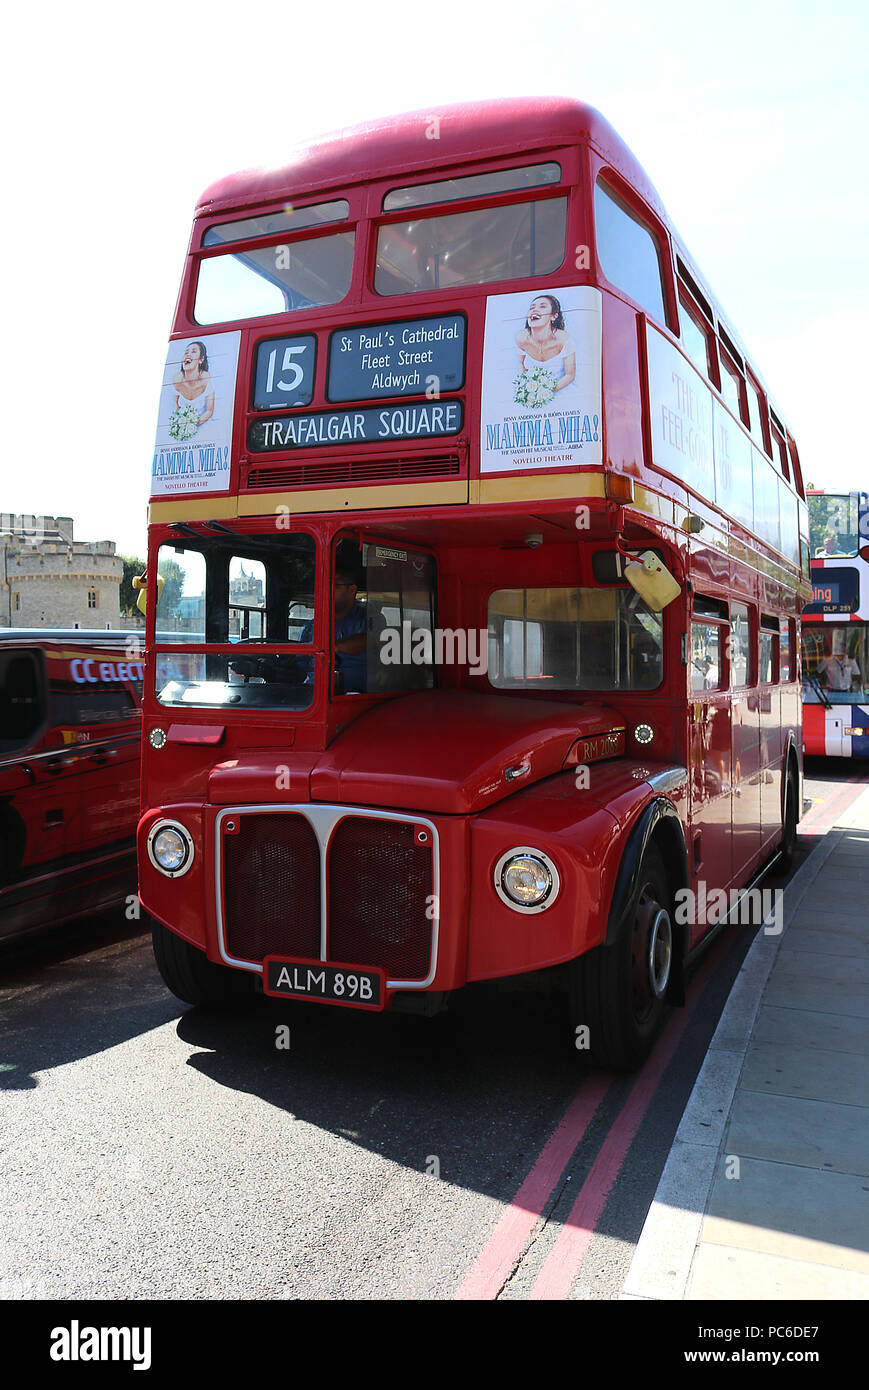 London Buses Routemaster Heritage Route 15, Central London, UK, 01 August 2018, London Buses Routemaster Heritage Route 15 runs between Trafalgar Square and Tower Hill using 1960's AEC Routemasters. It is the last and only regular London bus route using the original Routemaster bus. Credit: Rich Gold/Alamy Live News Stock Photo